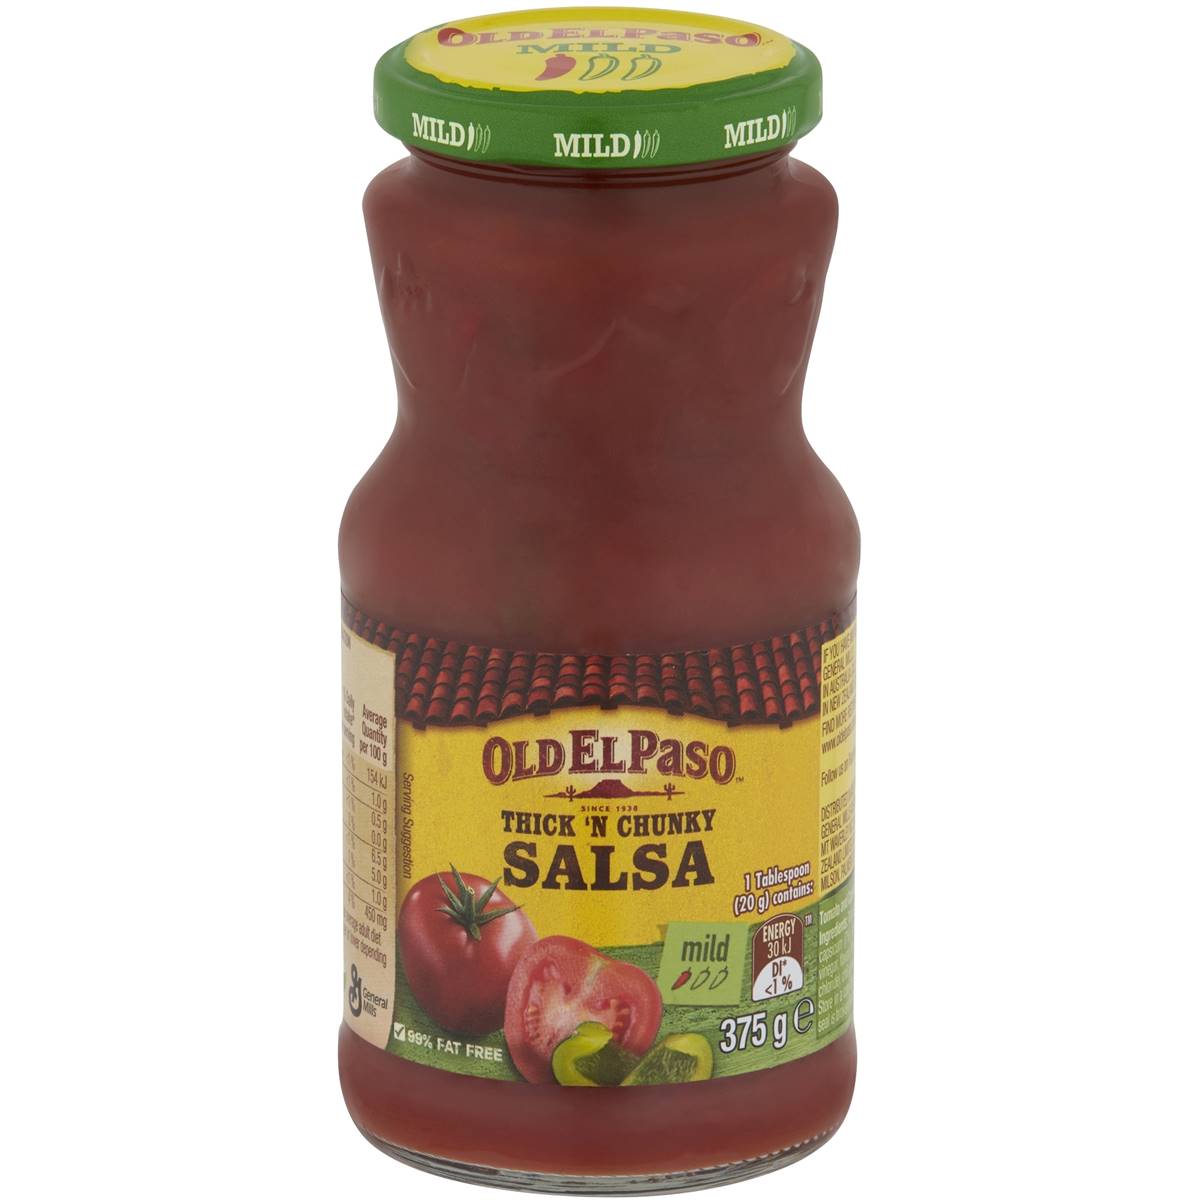 Calories in Old El Paso Thick 'n Chunky Salsa Mild Thick & Chunky